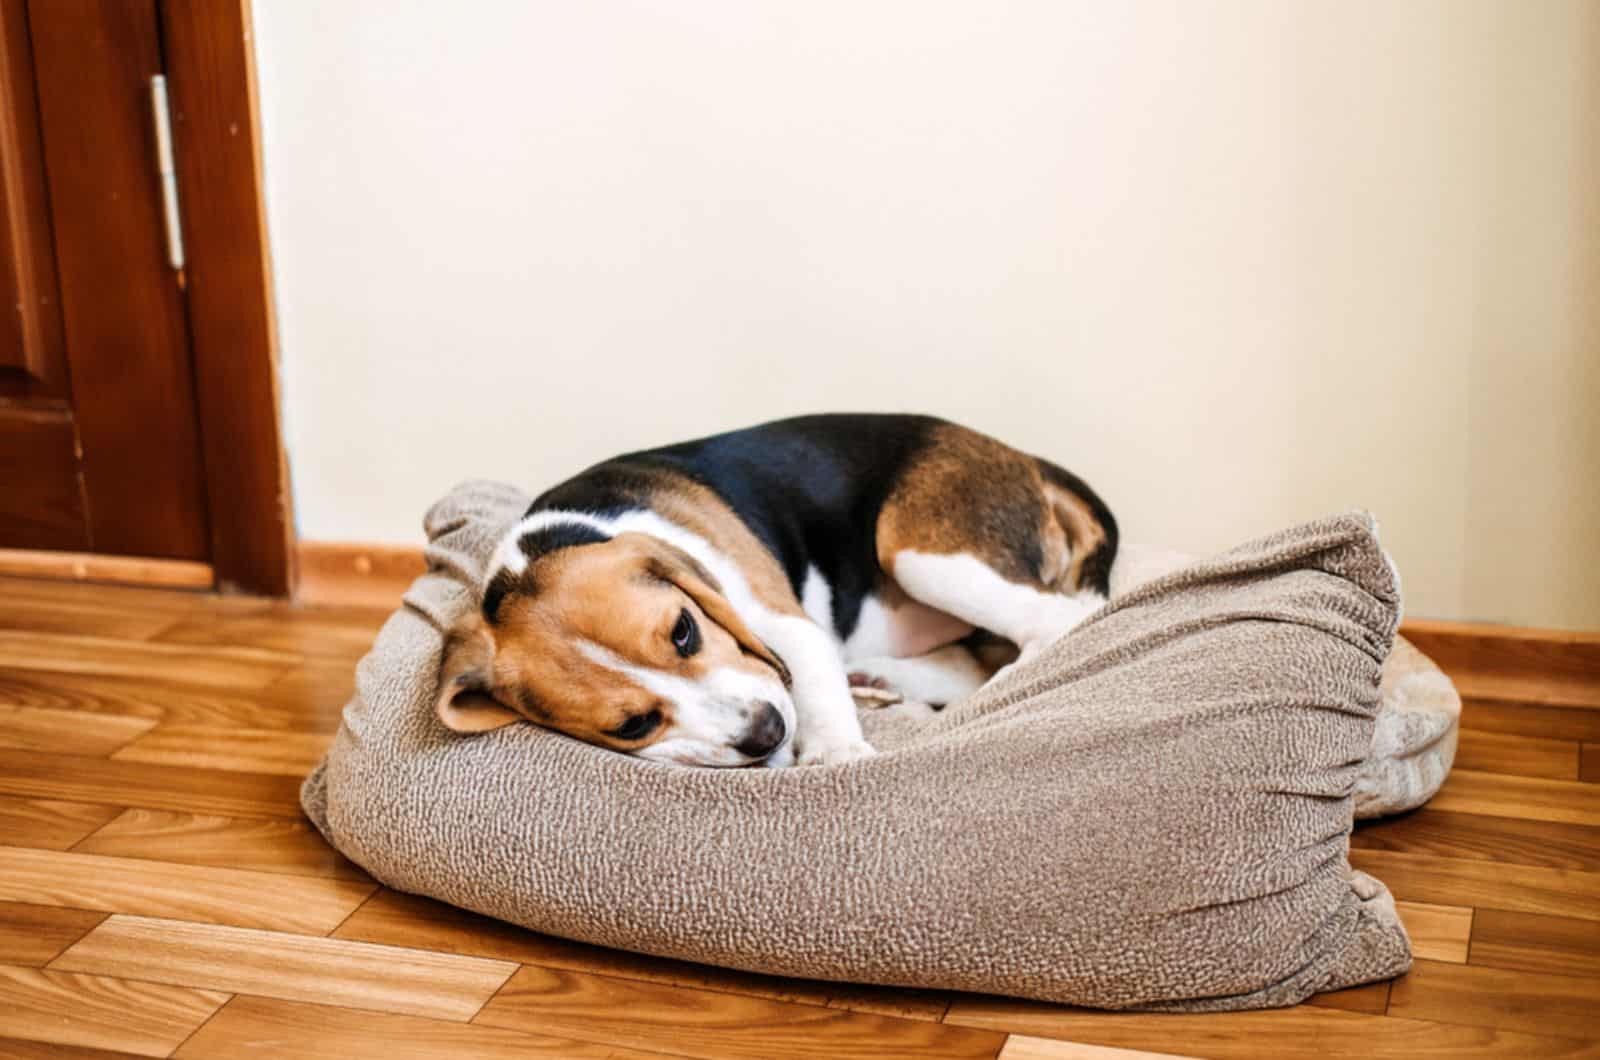 Sick Beagle Puppy is lying on dog bed